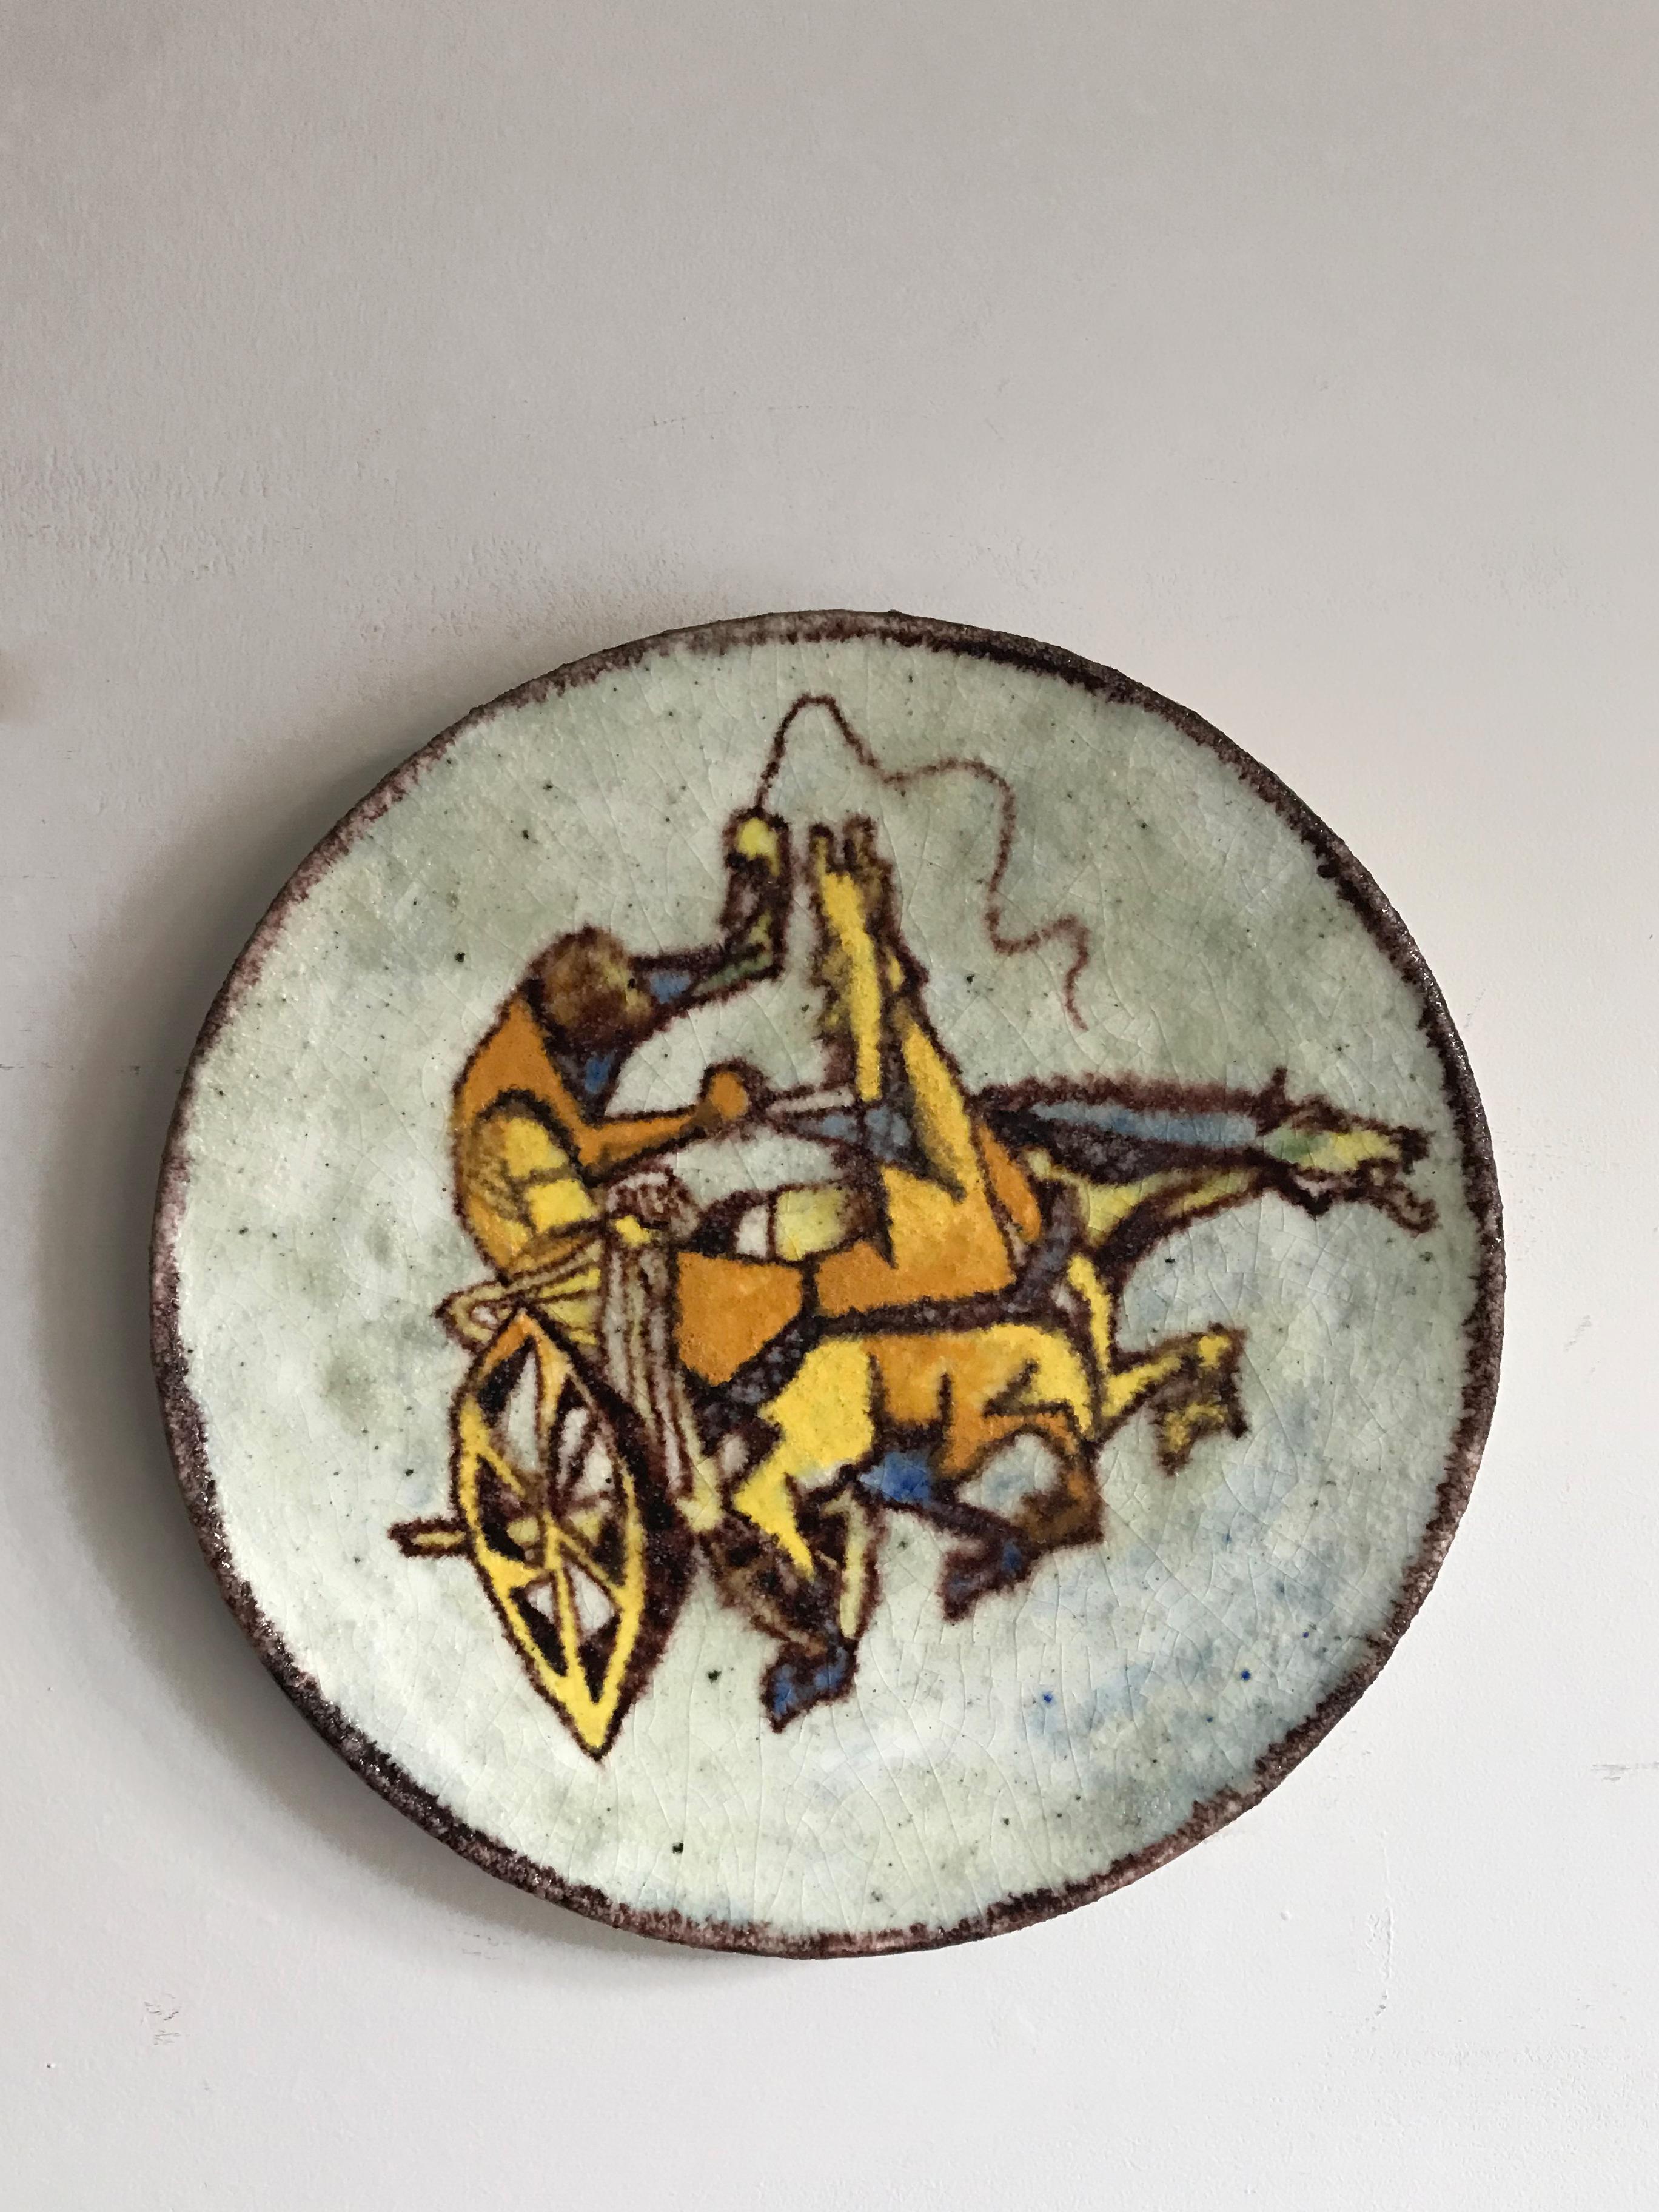 Italian midcentury modern design decorative ceramic wall plate designed by the Italian artist Carlo Zauli, decorated in polychrome with depiction of Figure on Chariot, signature of the artist Zauli / Faenza on the back, Italy 1950s.

Please note